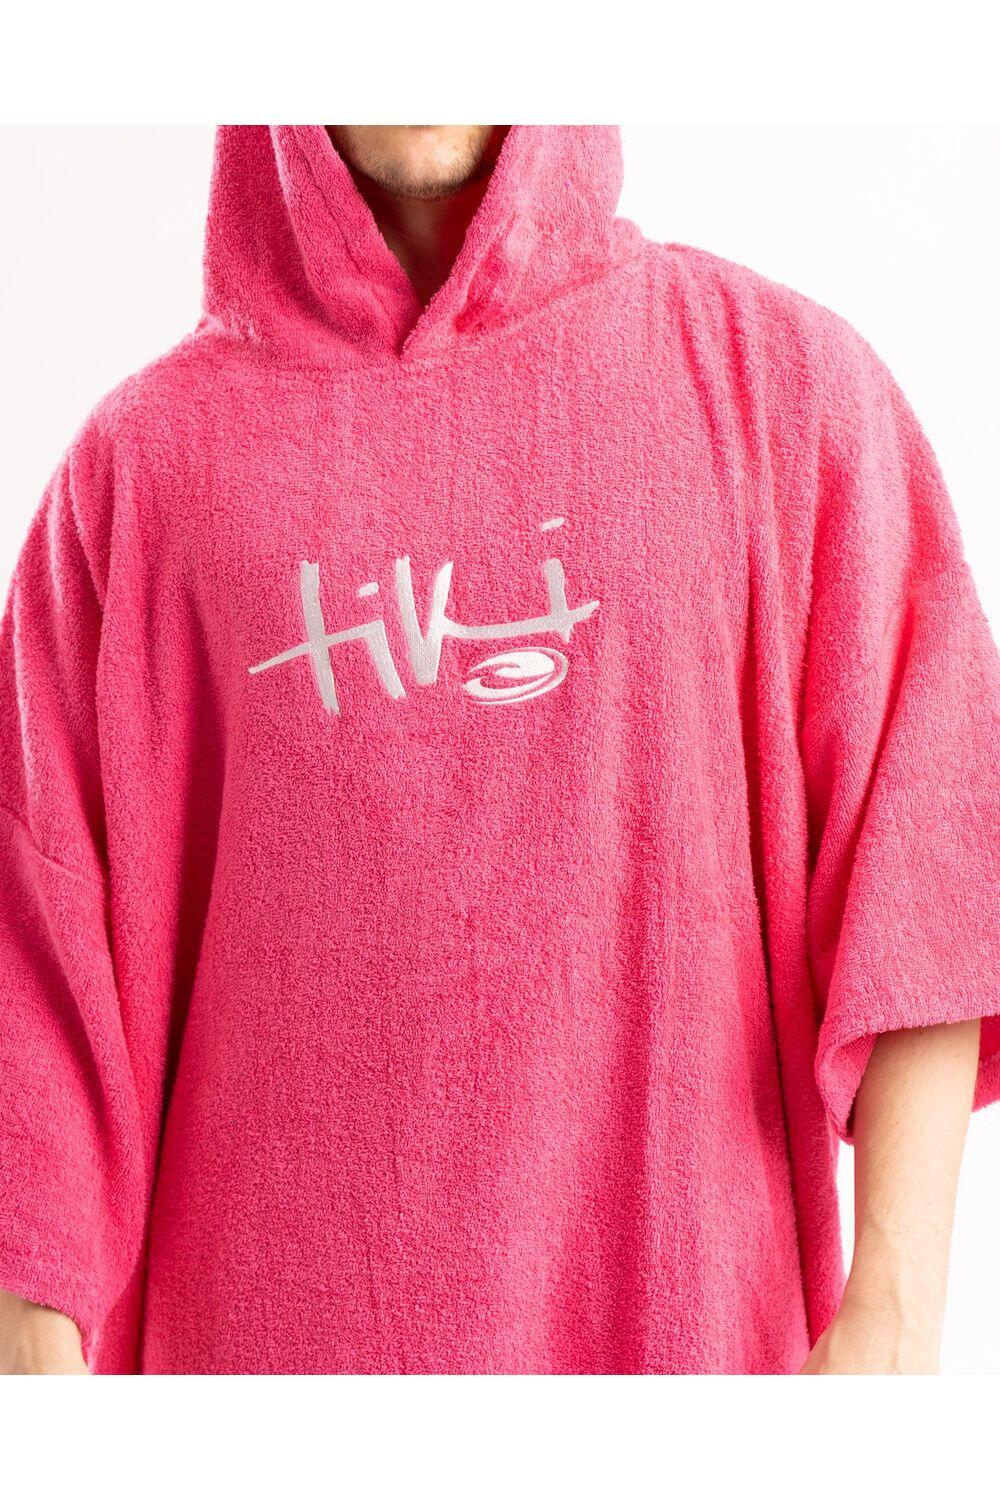 Adults Hooded Change Robe - Pink 3/7